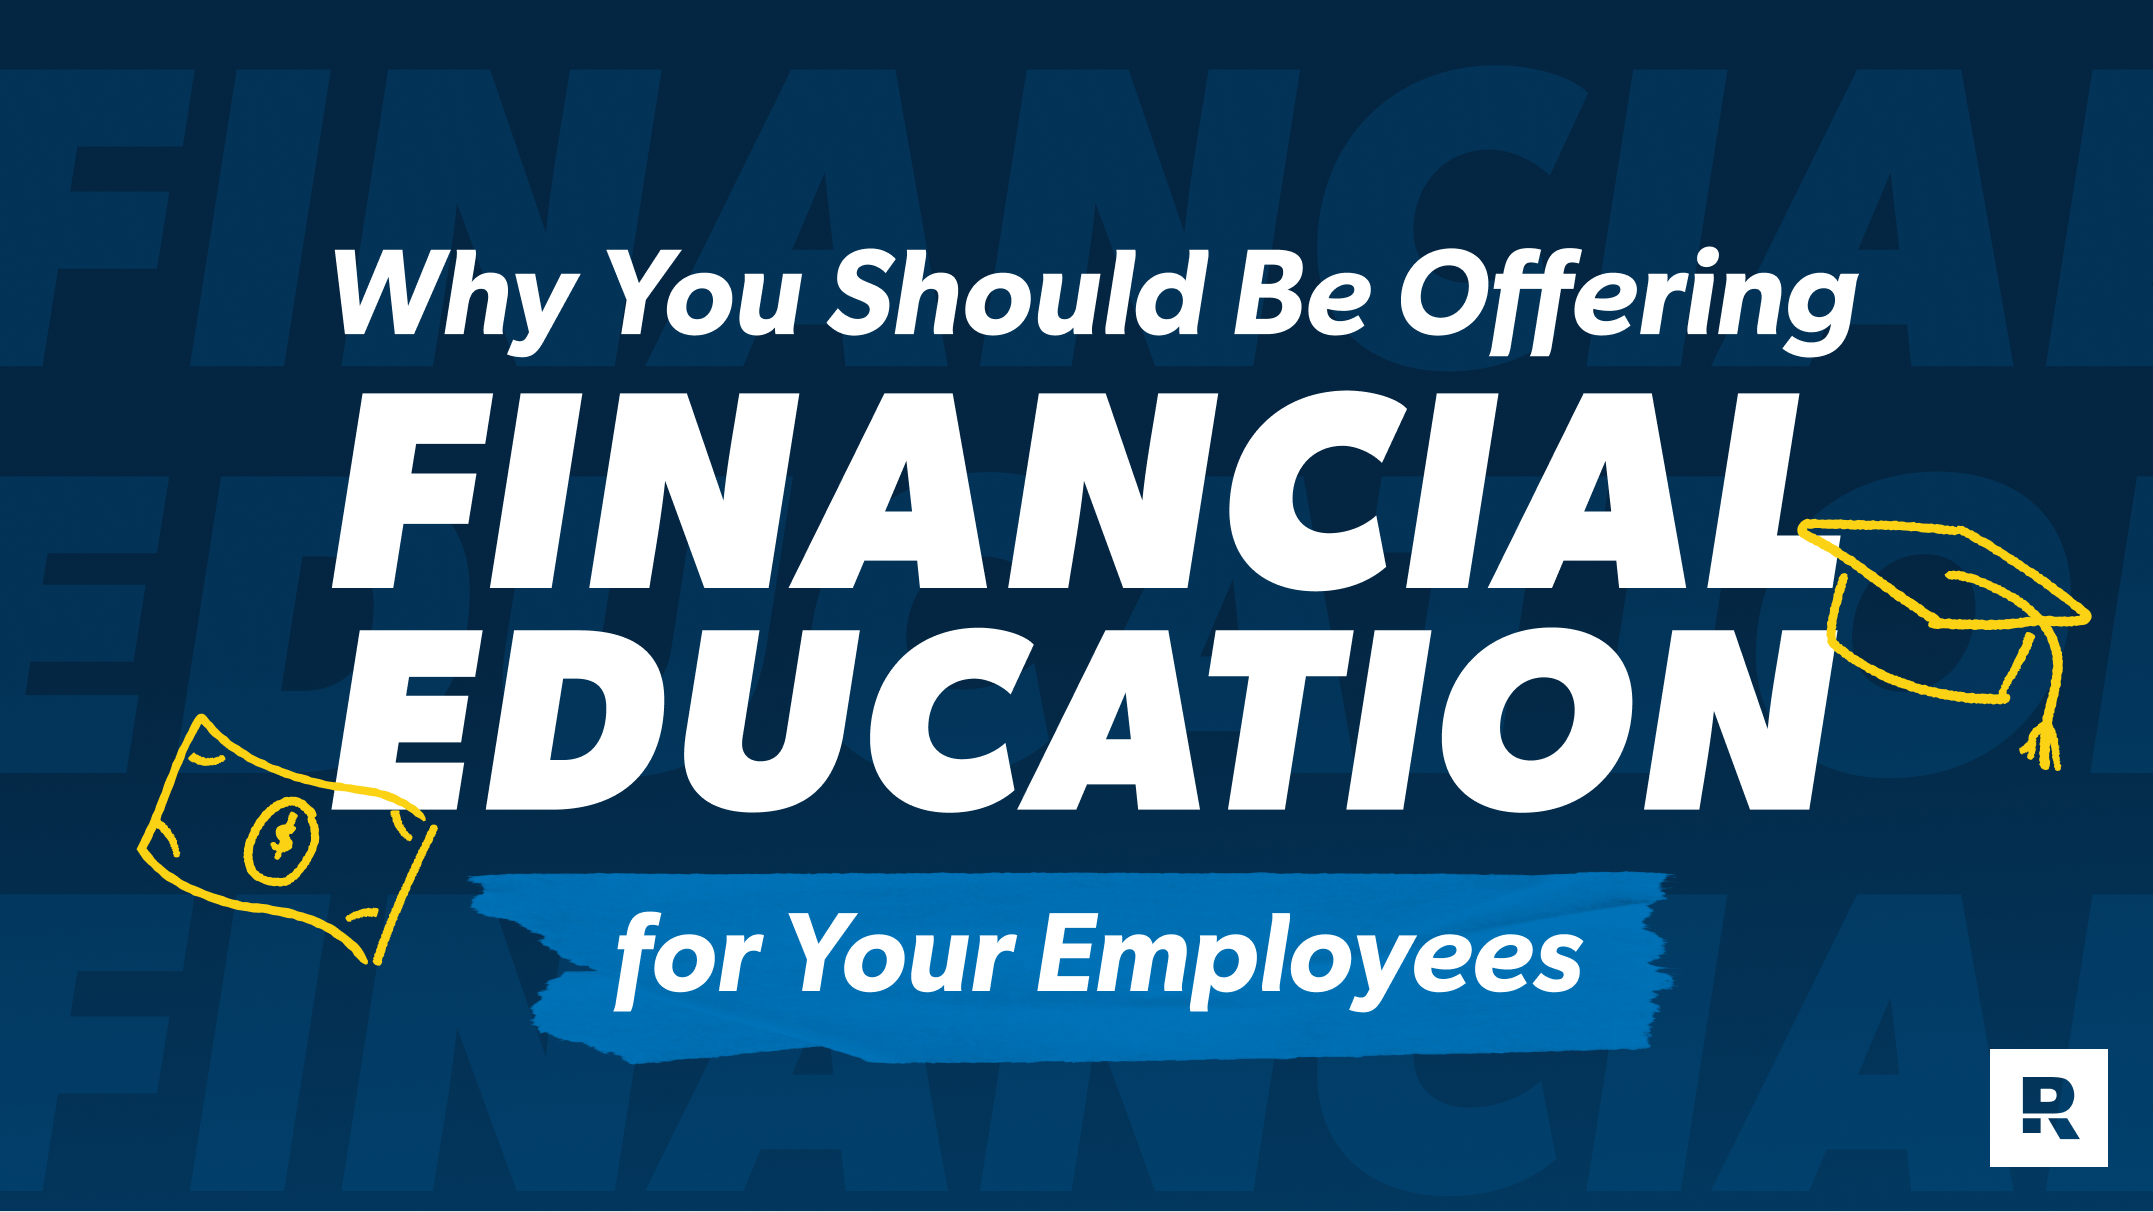 Financial Education for Employees